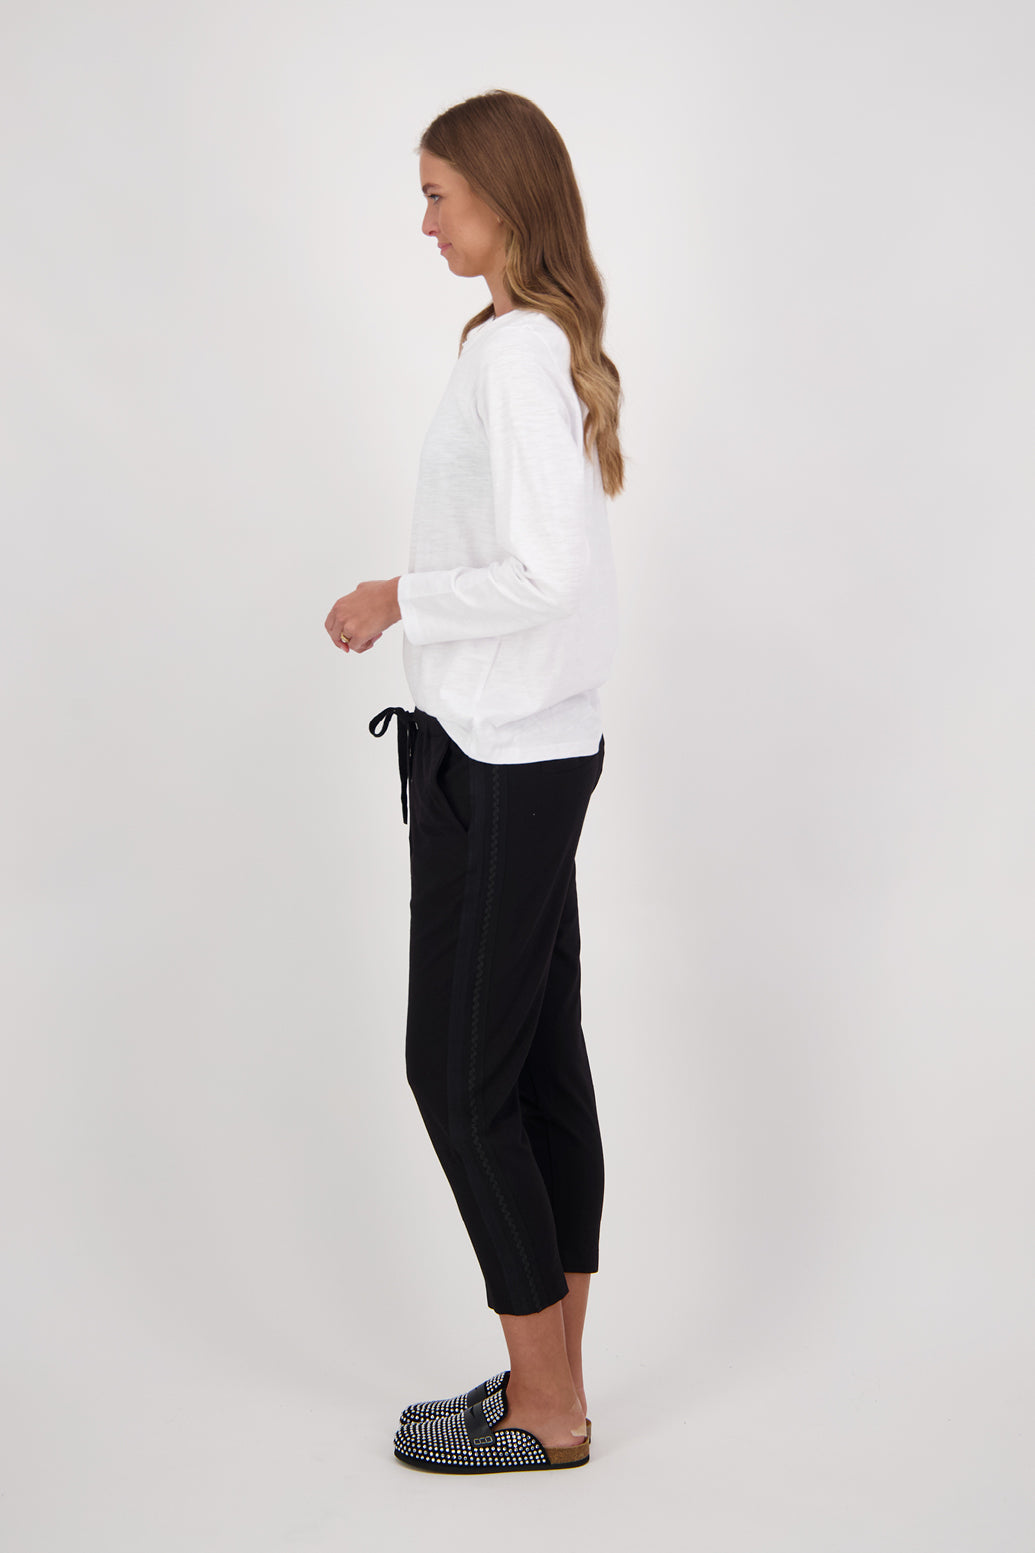 Clementine Black Ankle Pant/Trousers